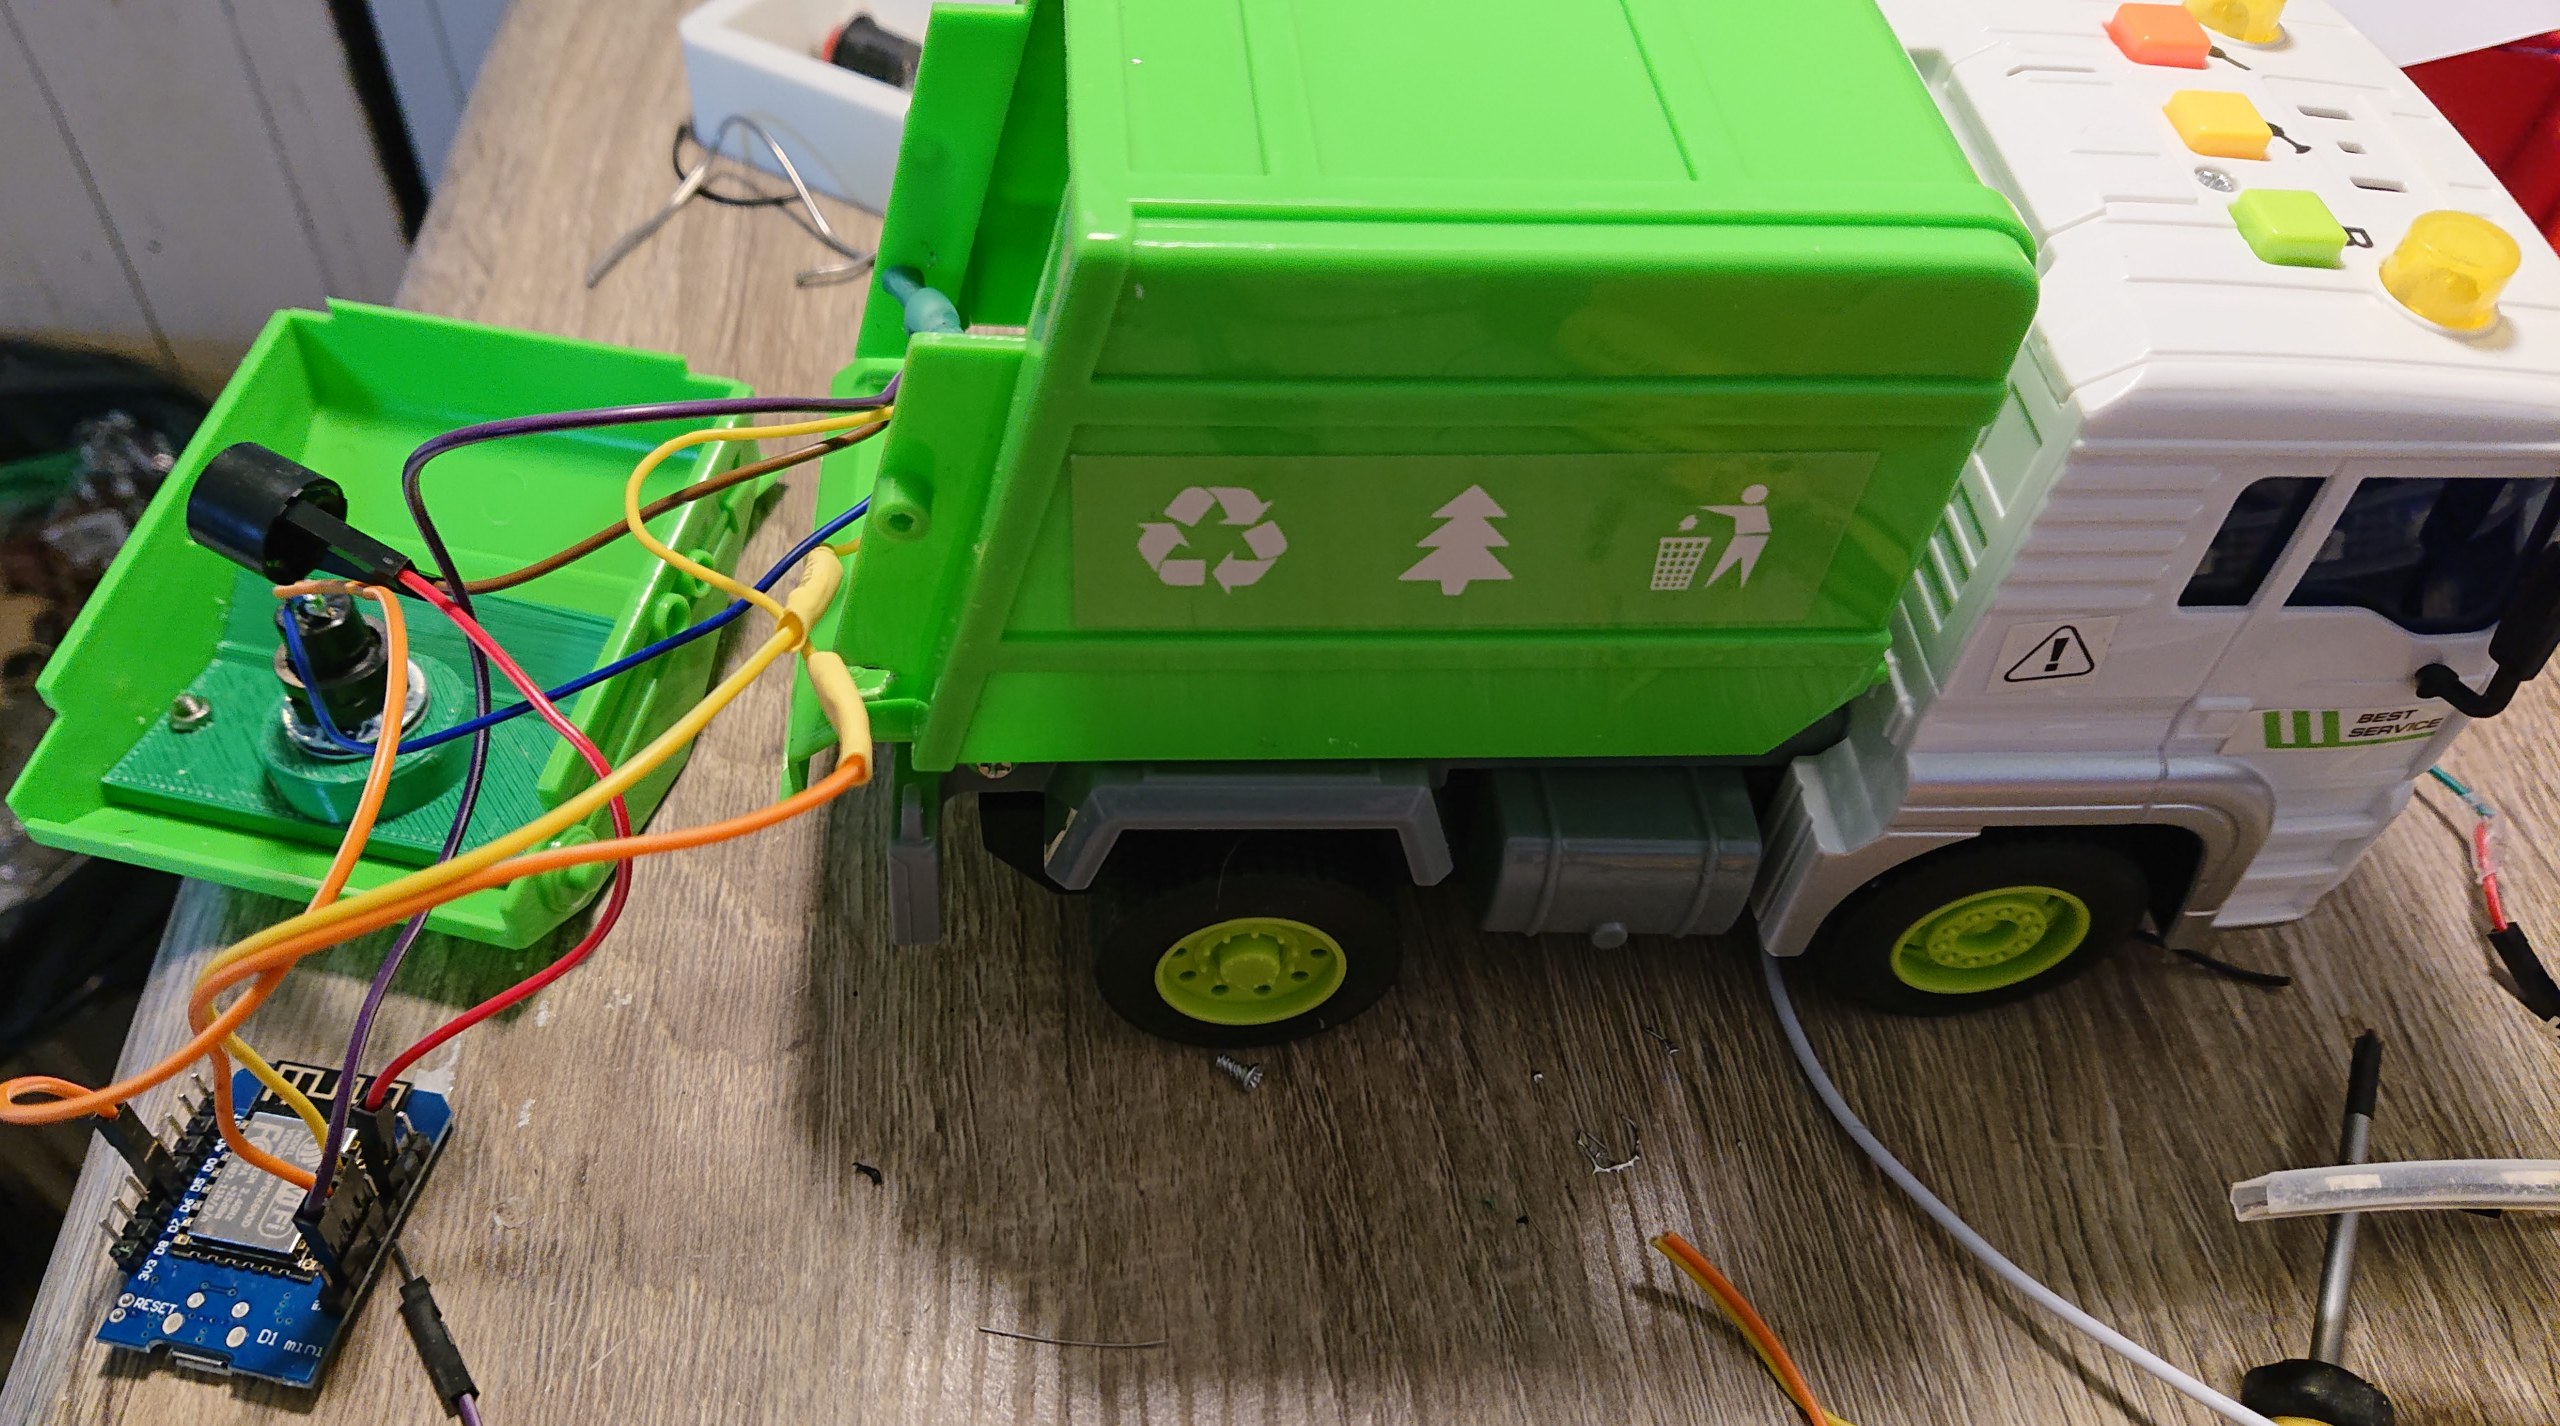 IoT Carbage truck